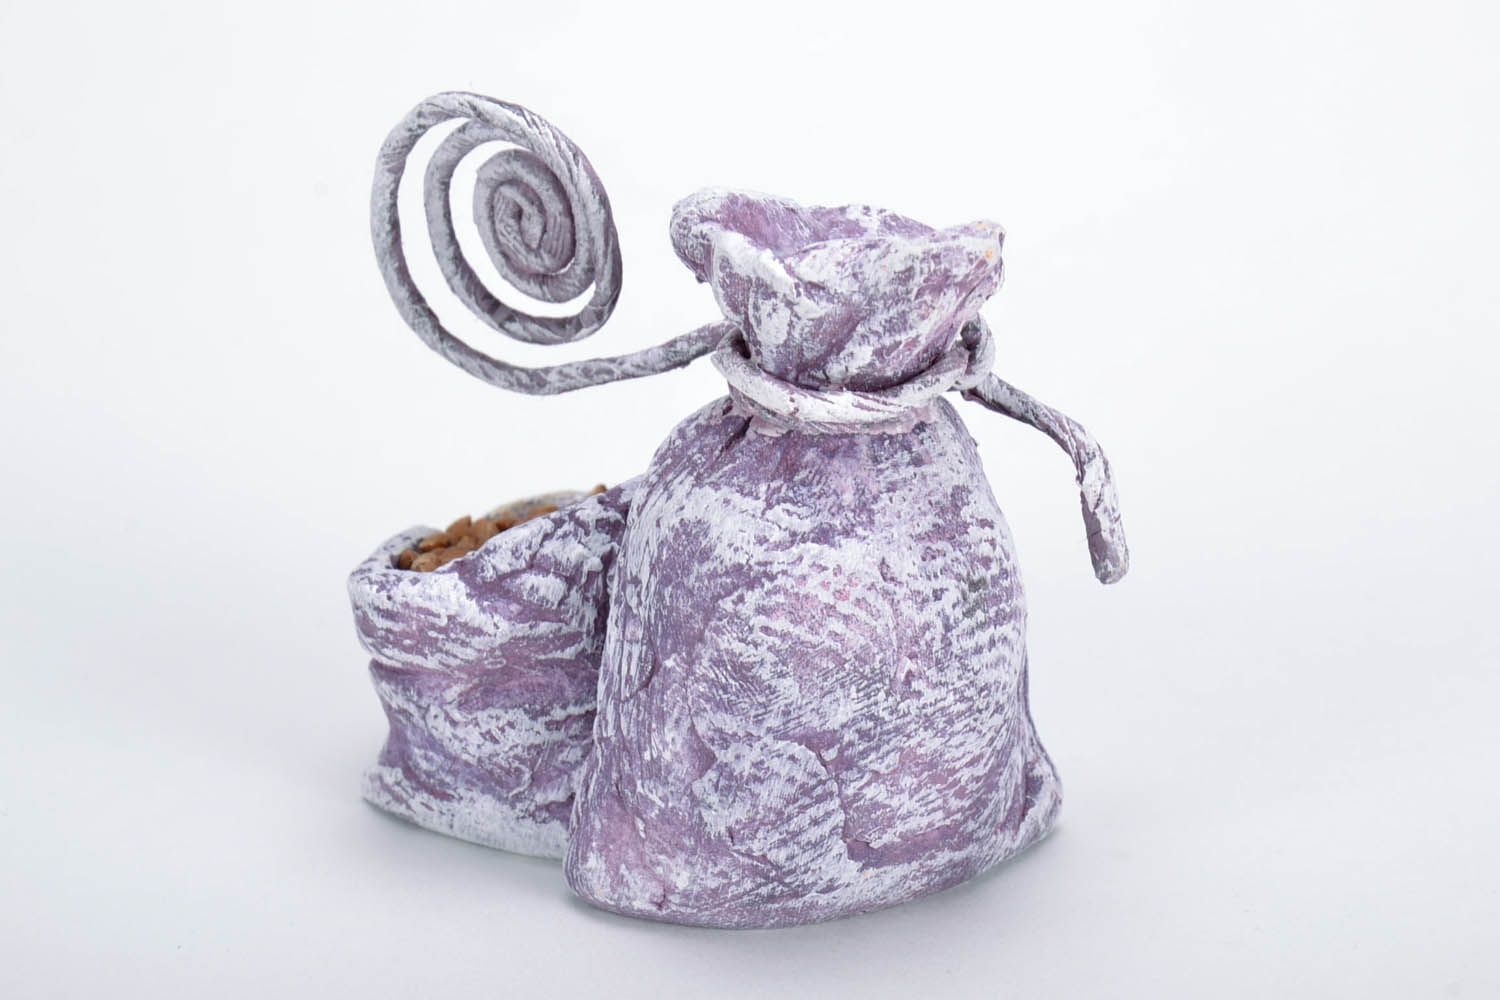 Plaster statuette Bags with Buckwheat photo 2